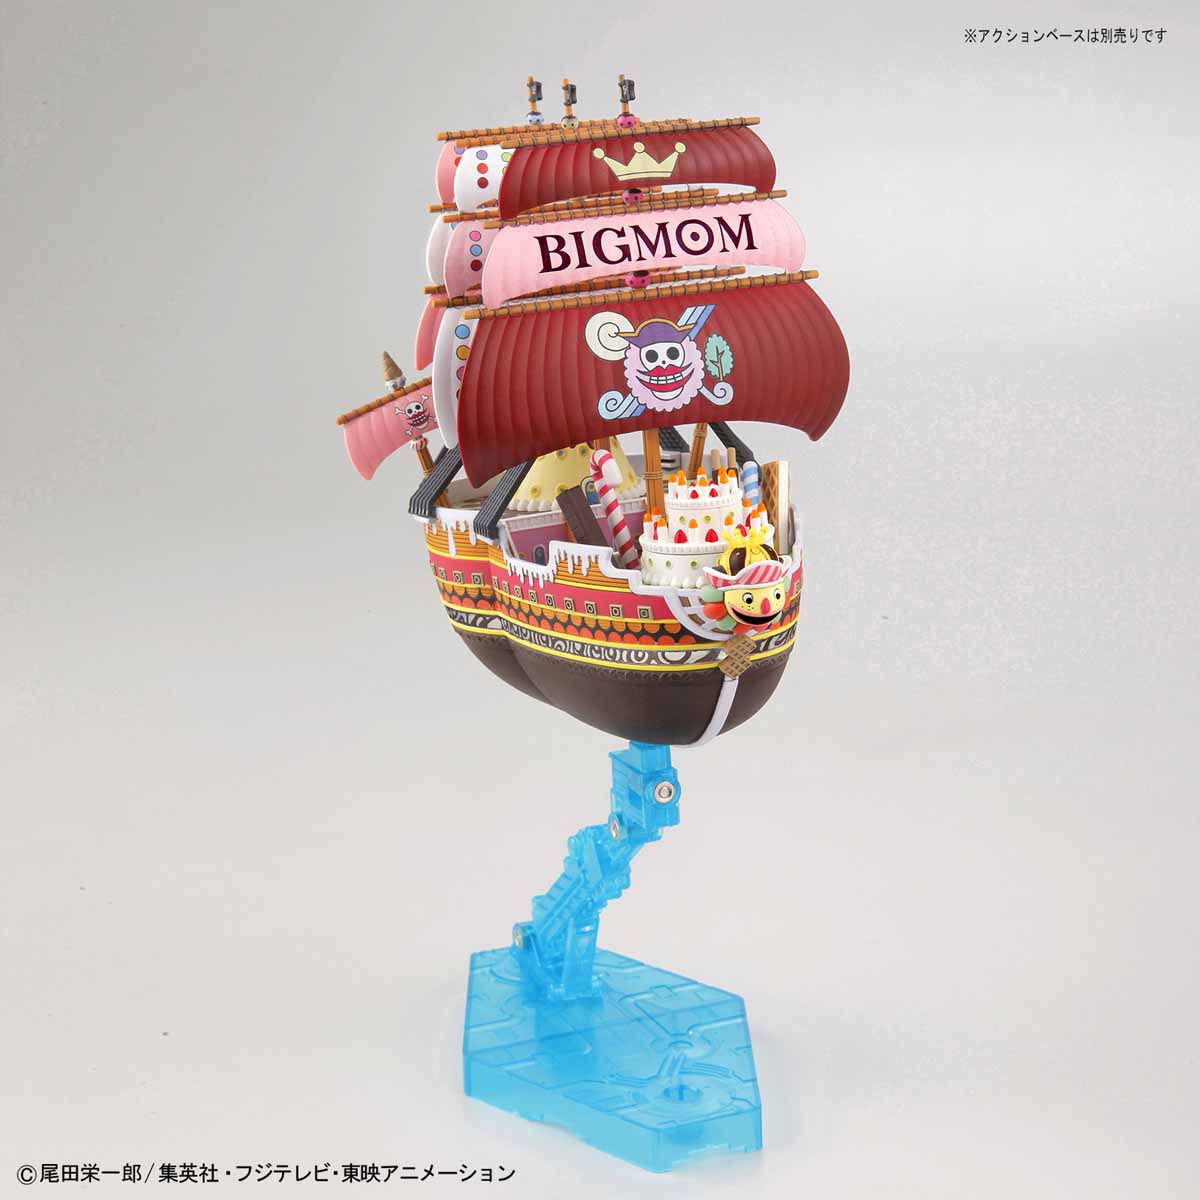 One Piece - Great Ship Collection Queen Mama Shante